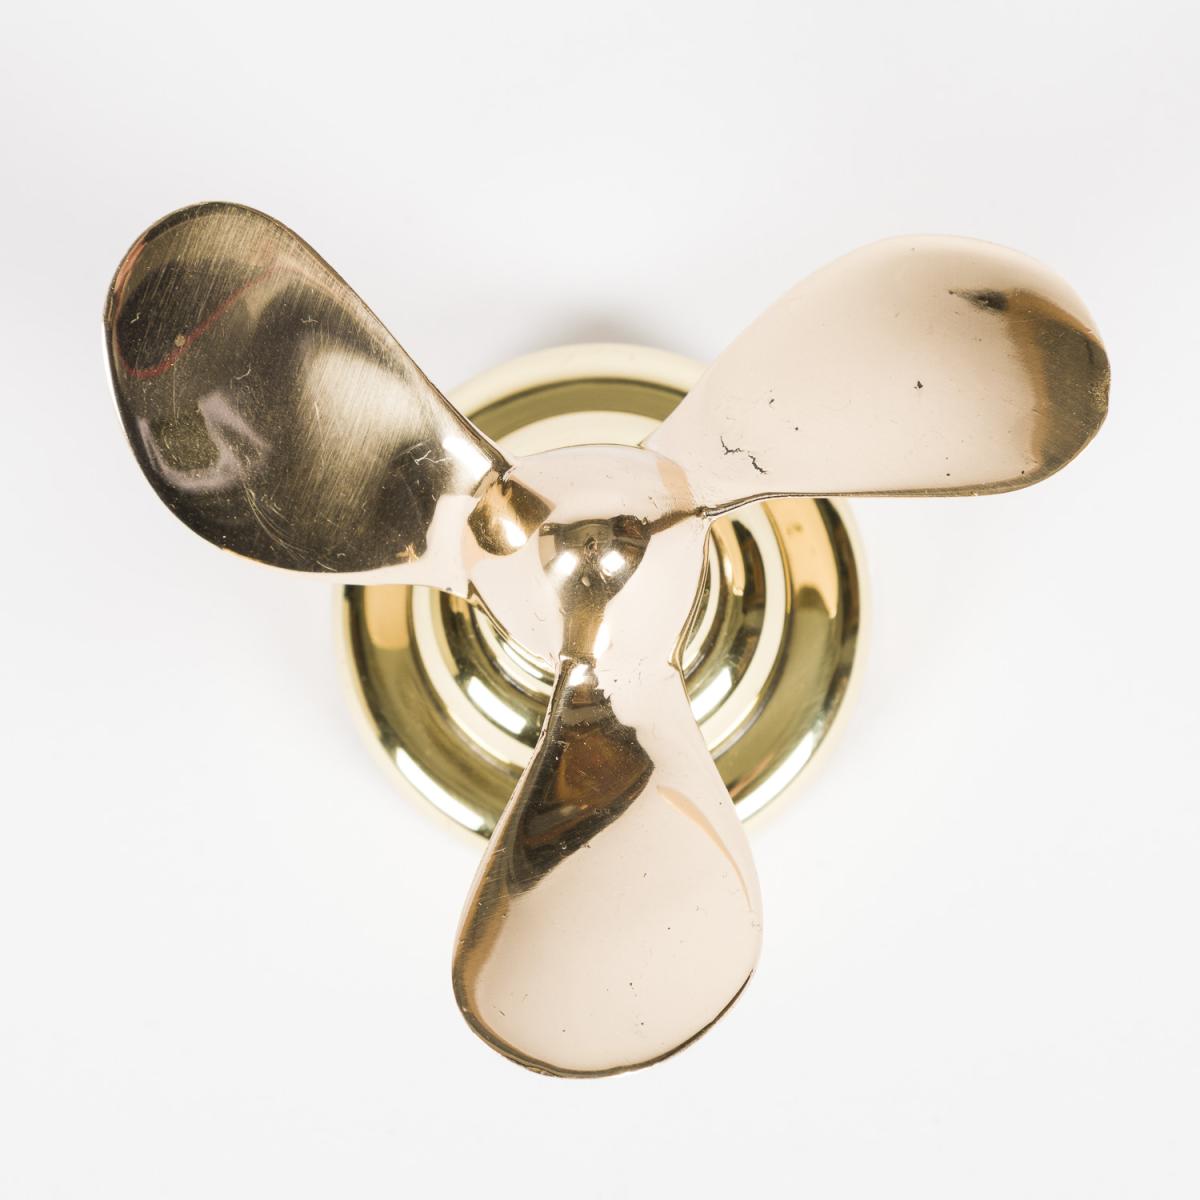 Model propellers commemorating the launch of T.S.S. Bagan, dated 1938.